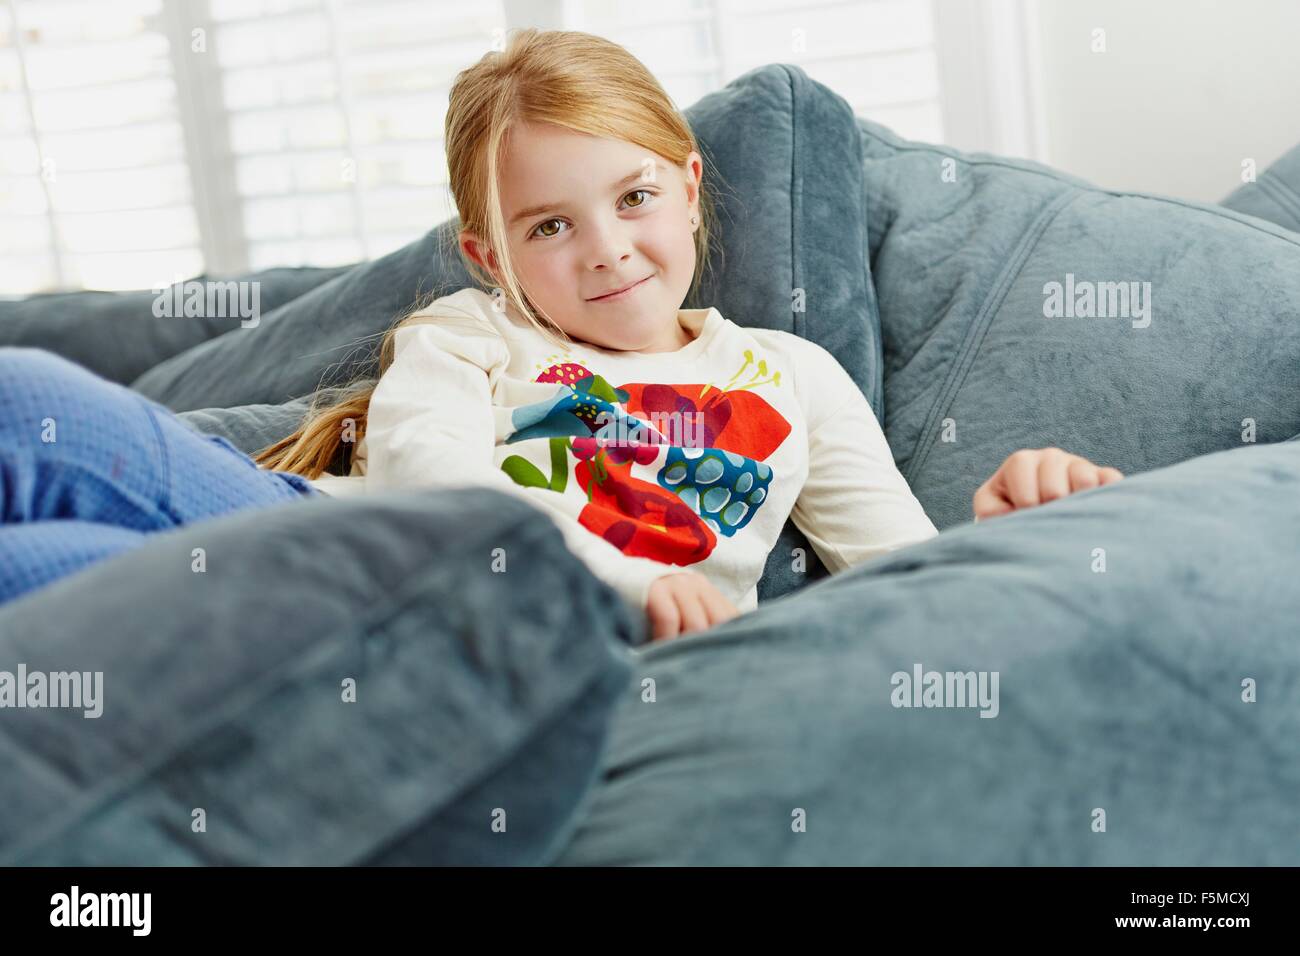 Girl lying on pile of cushions in living room Stock Photo